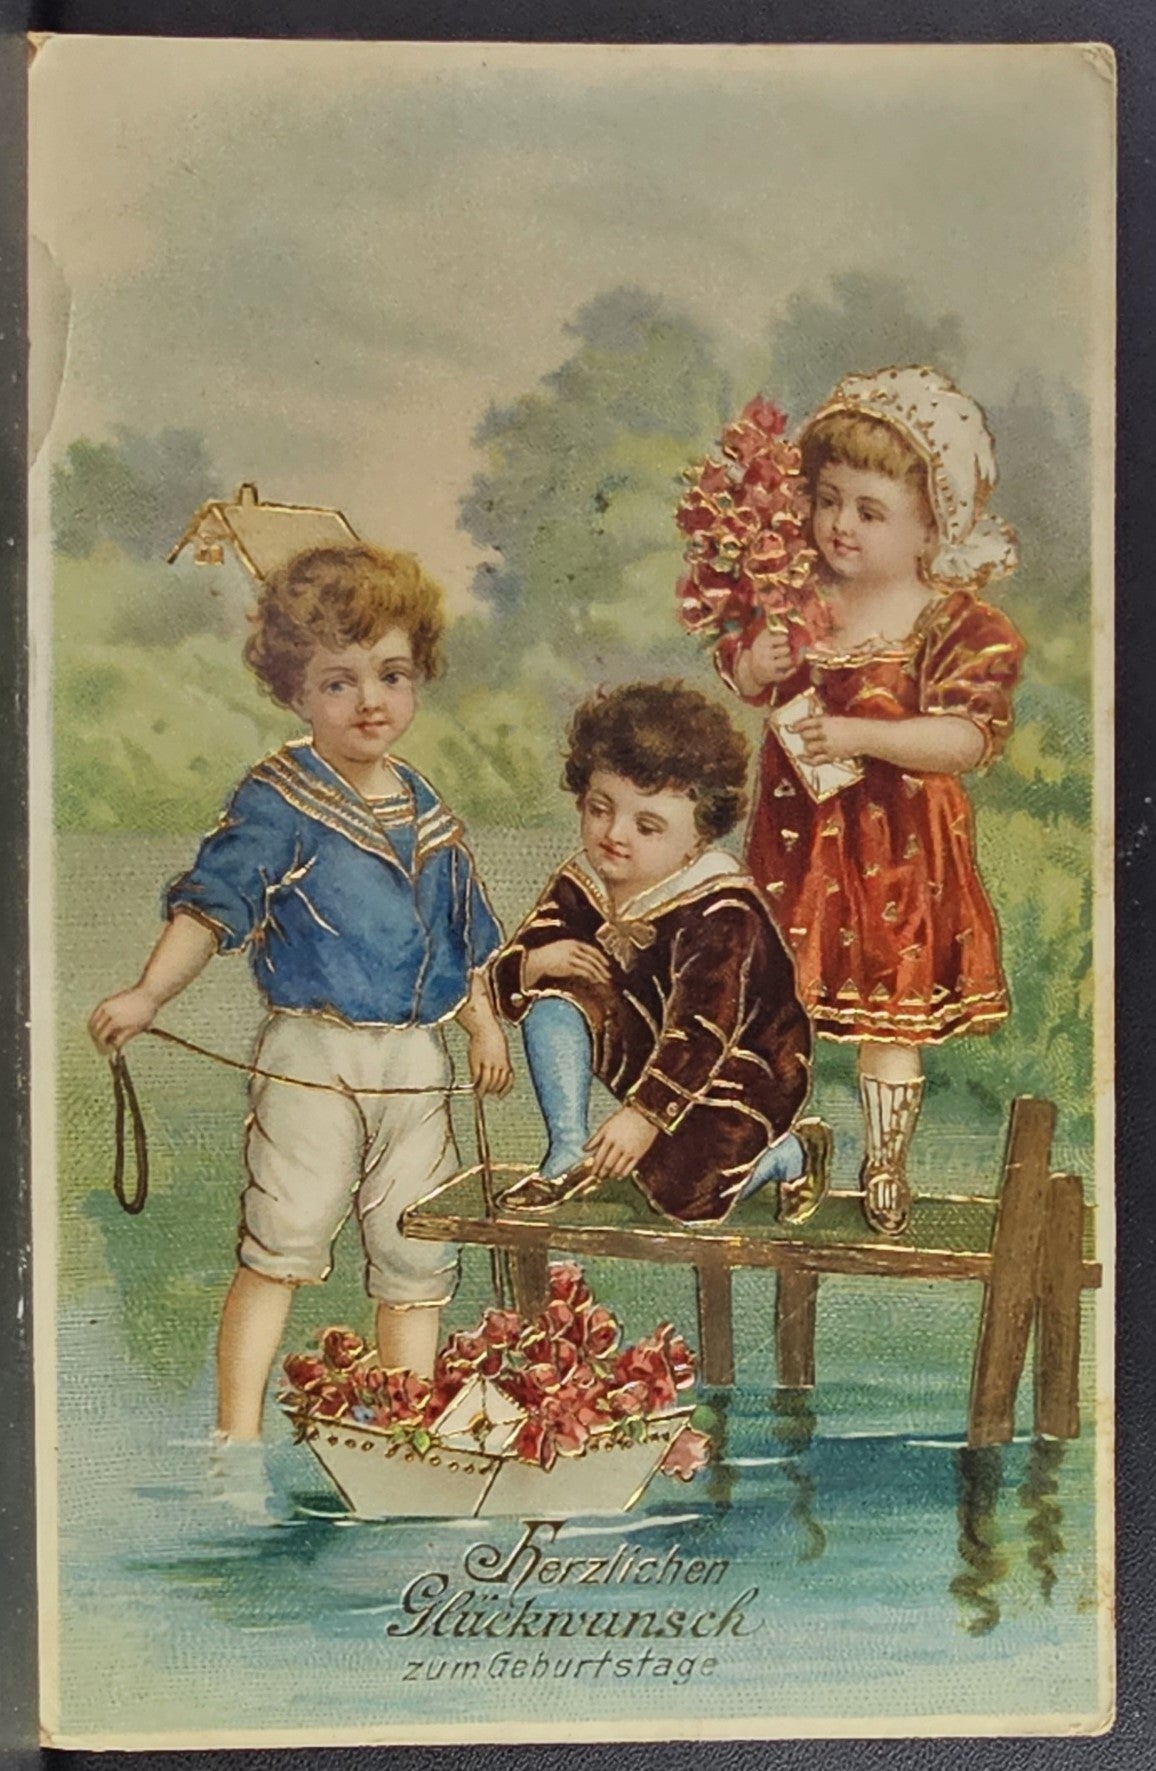 Birthday Postcard Gold Embossed Card Children Playing with Sailboat Filled with Flowers